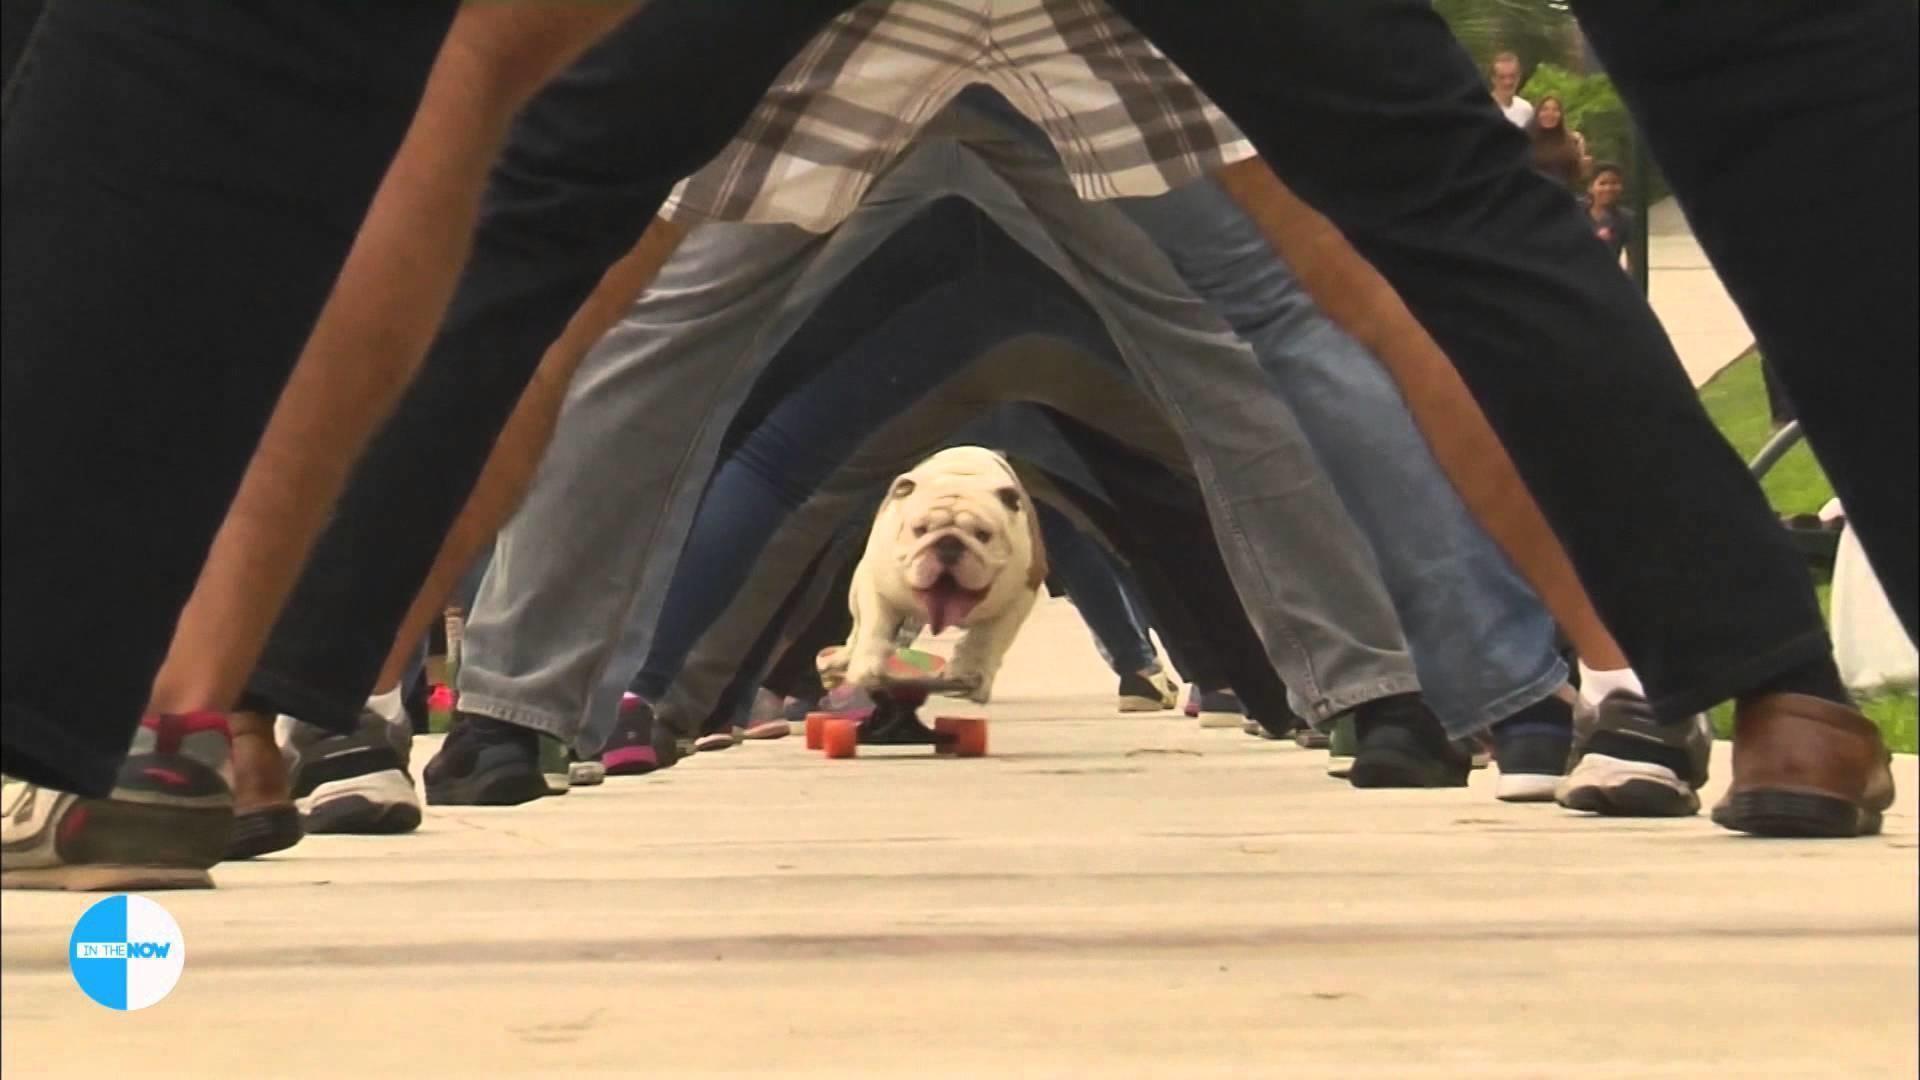 This bulldog made the Guinness Book of World Records for skateboarding, rolling through the legs of about 30 people.